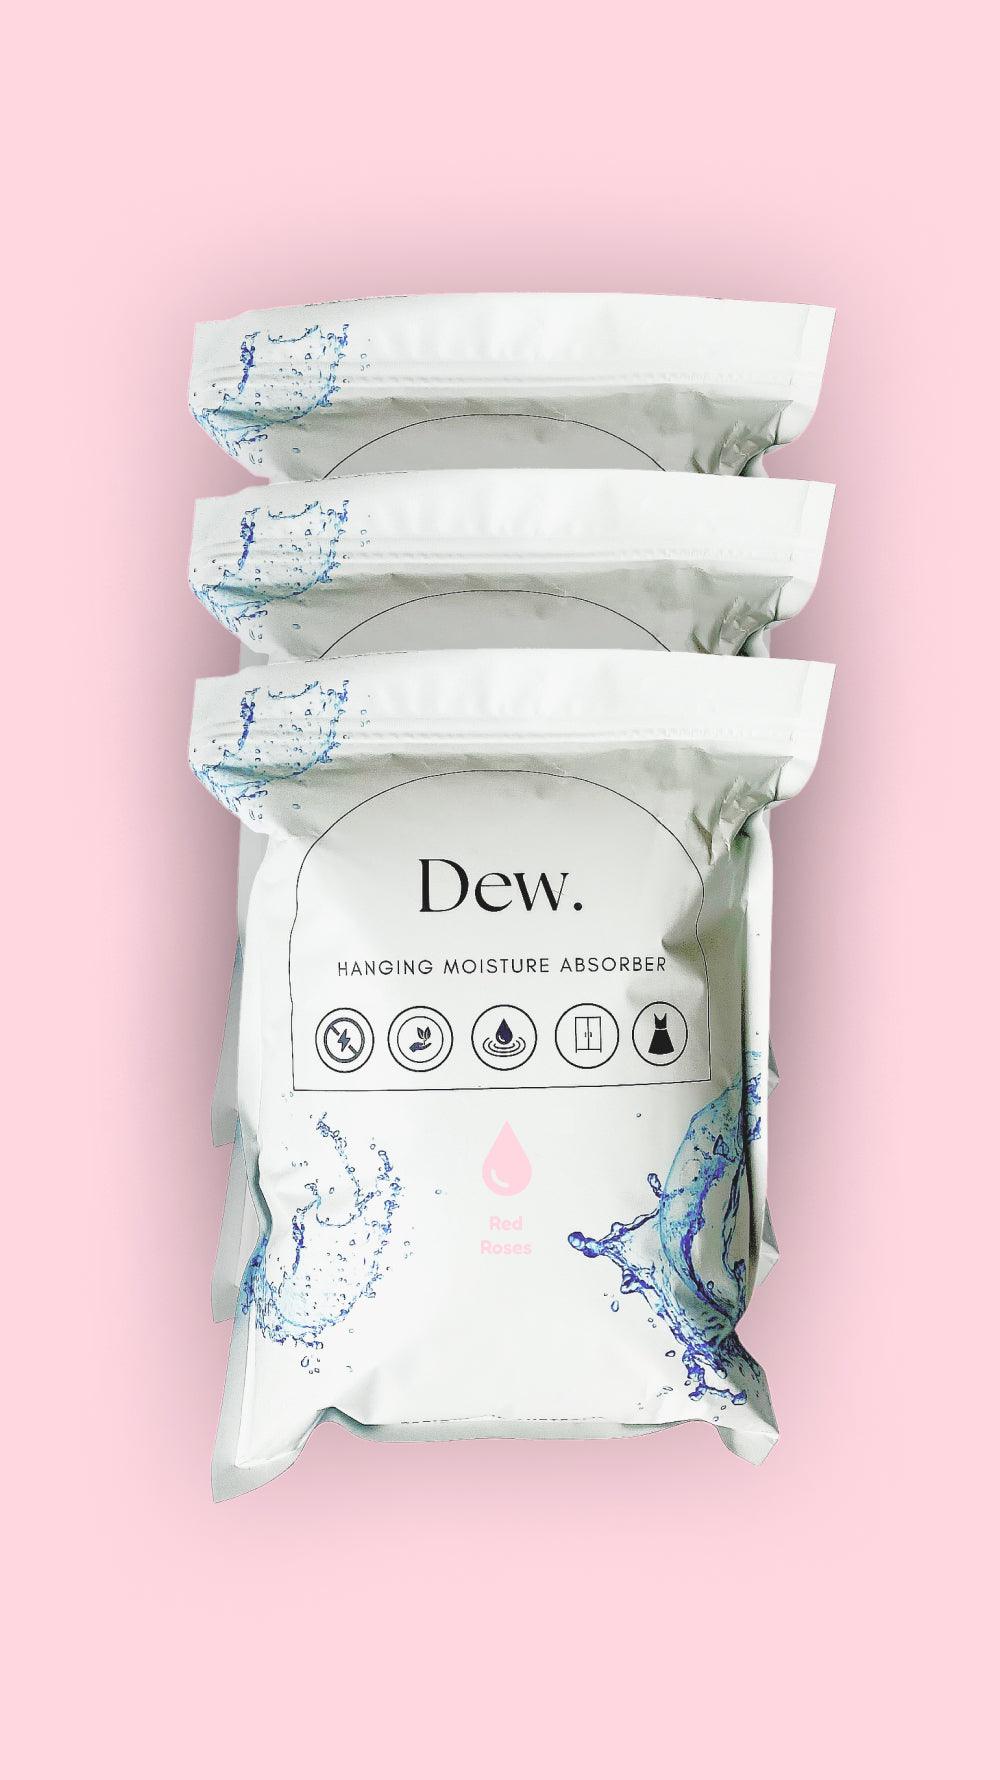 RED ROSES | HANGING MOISTURE ABSORBER - Dew.